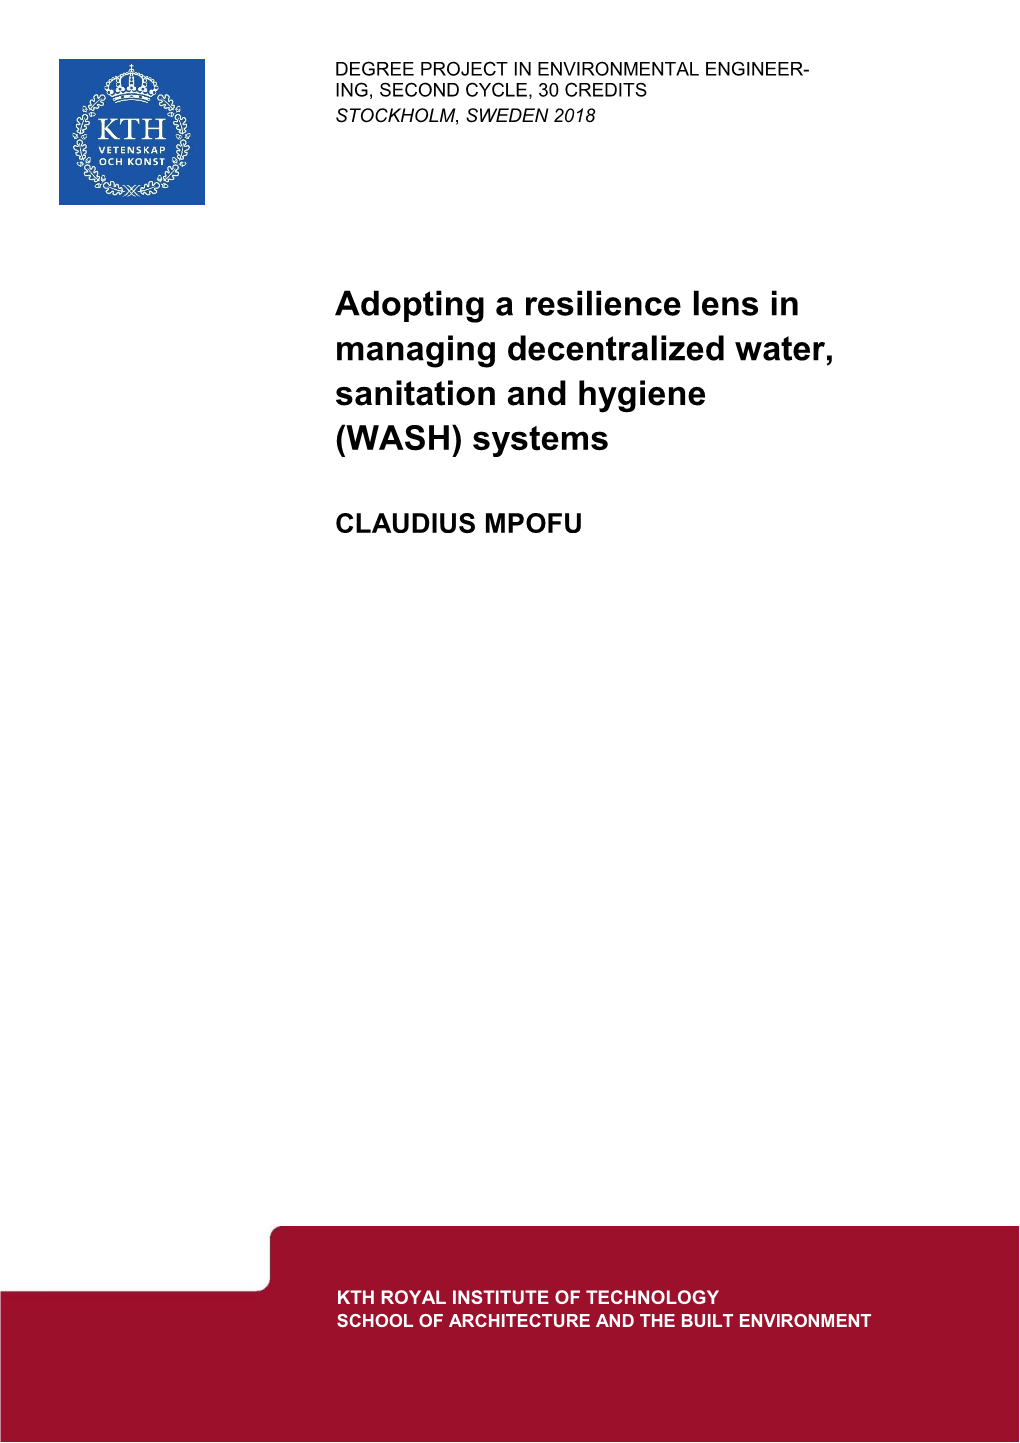 Adopting a Resilience Lens in Managing Decentralized Water, Sanitation and Hygiene (WASH) Systems